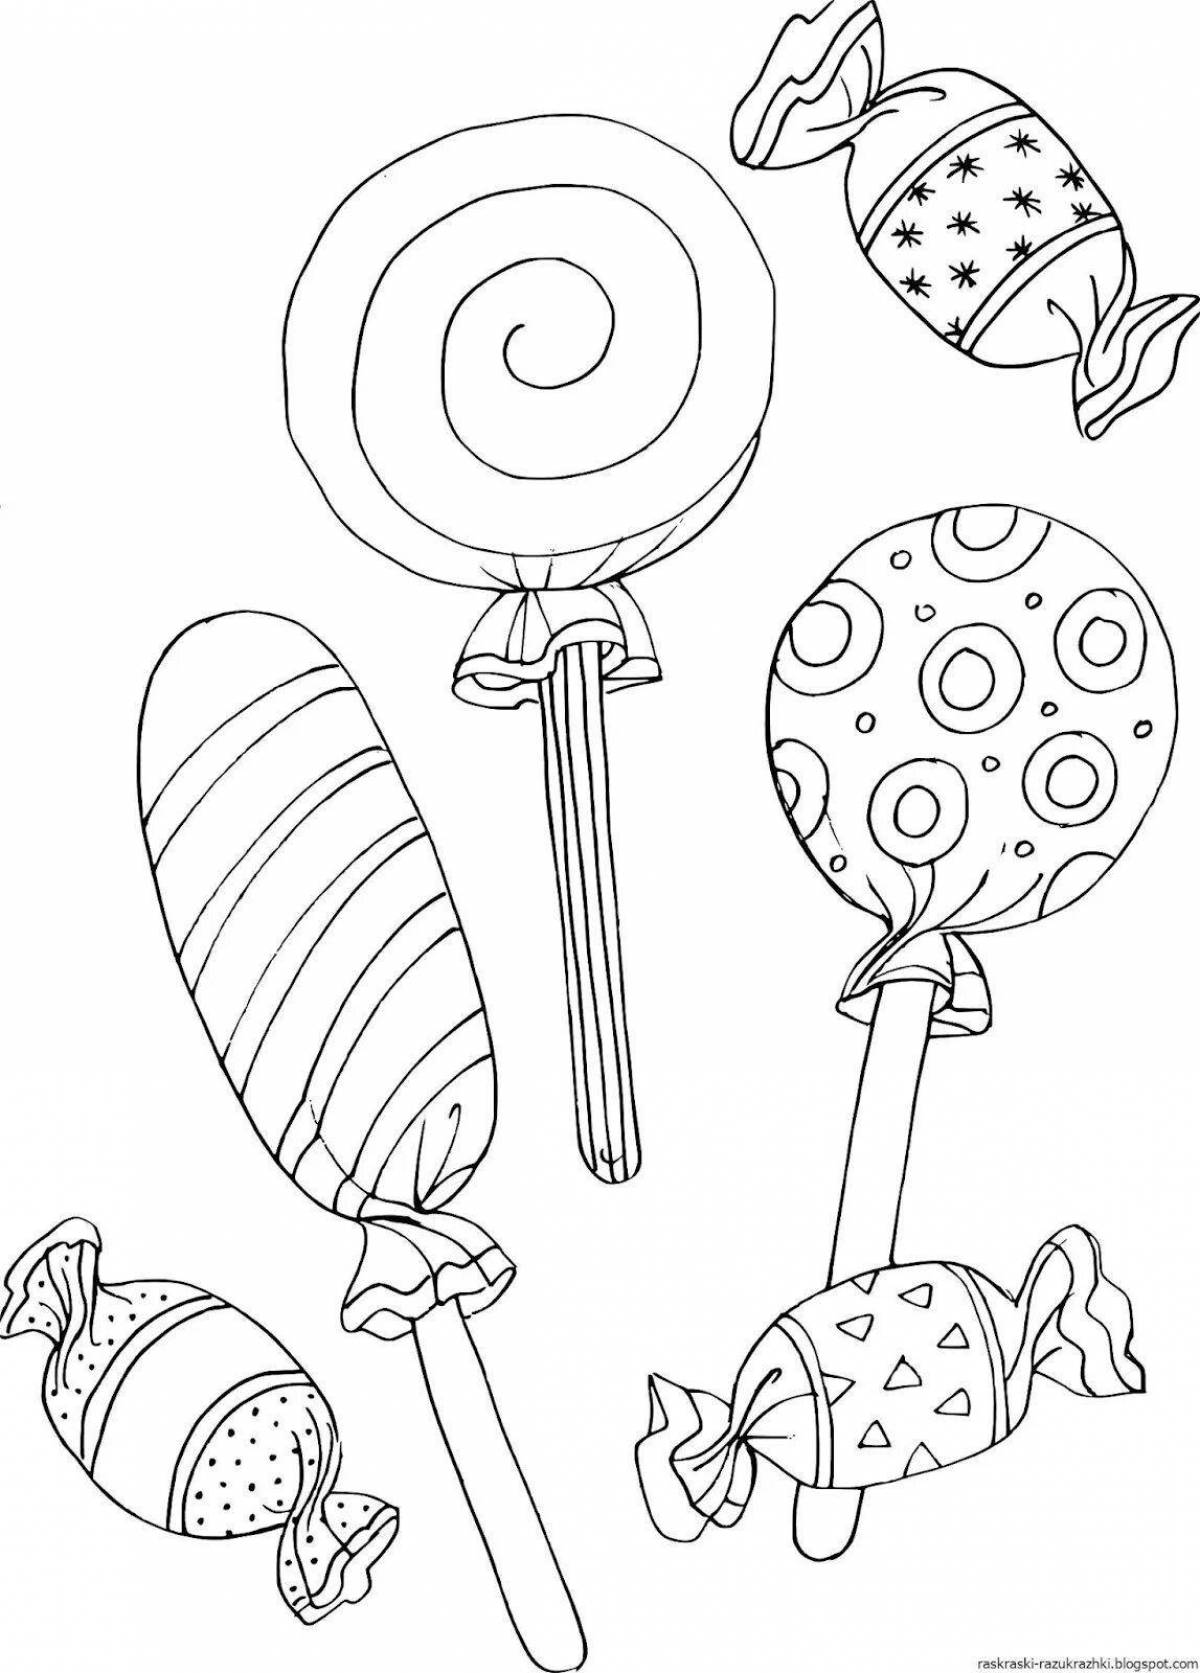 Wonderful sweets coloring book